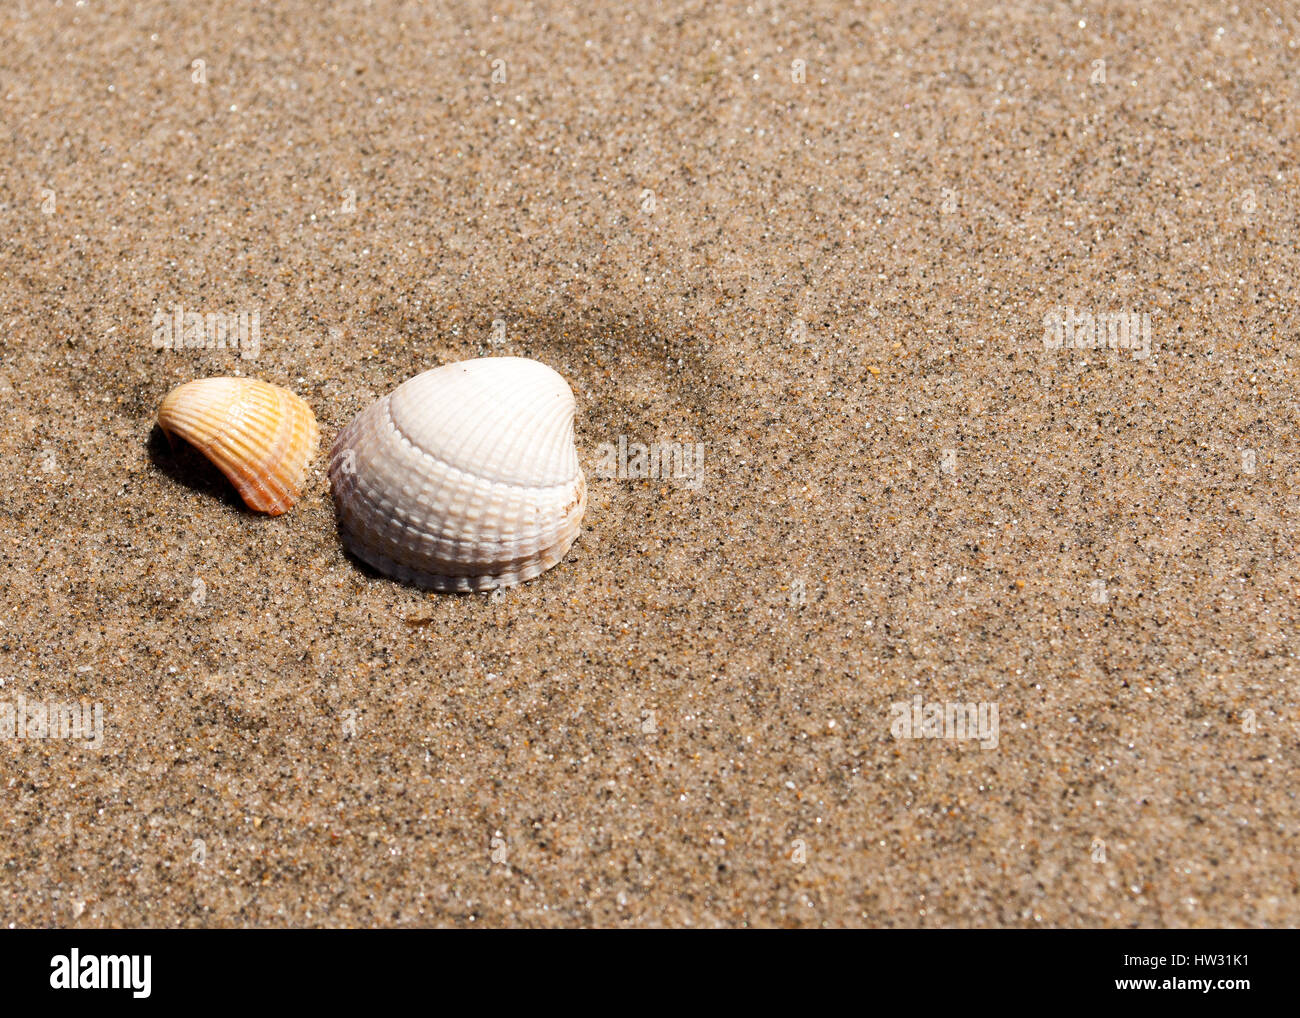 background image of 2 small shells in sand on the beach Stock Photo